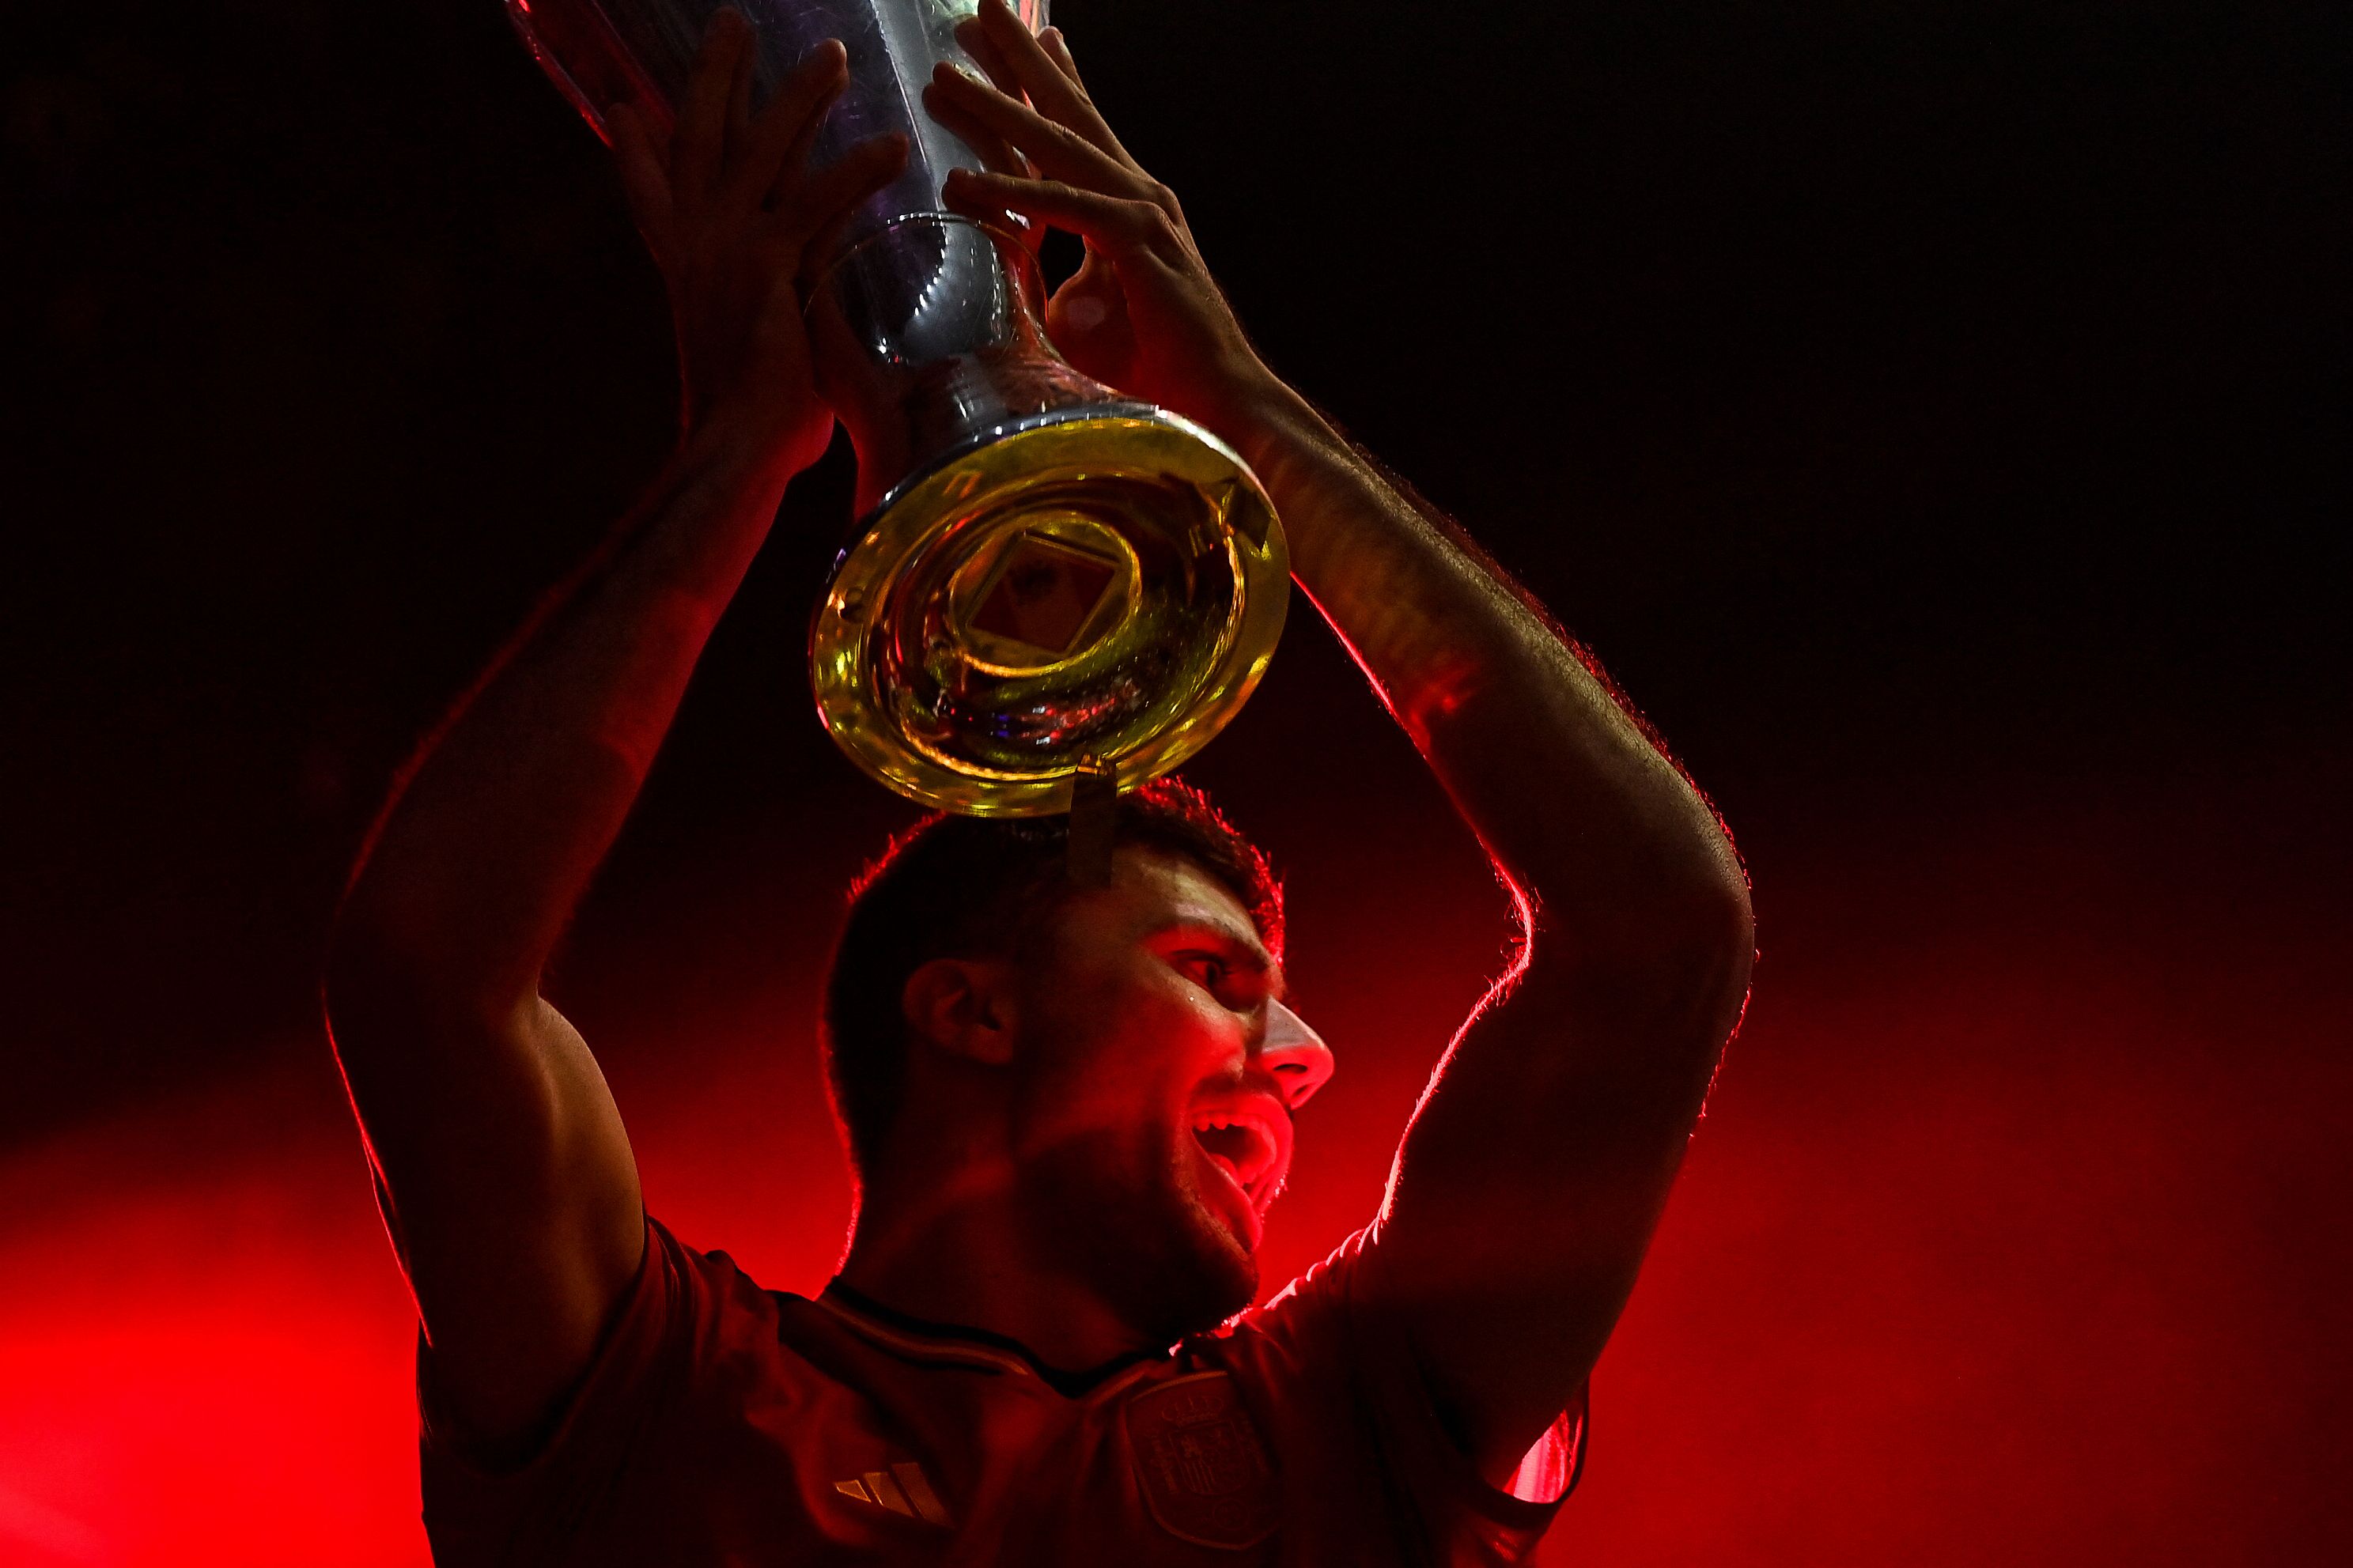 Rodri celebrates with the UEFA Nations League trophy after Spain's win in the final against Croatia in June 2023.